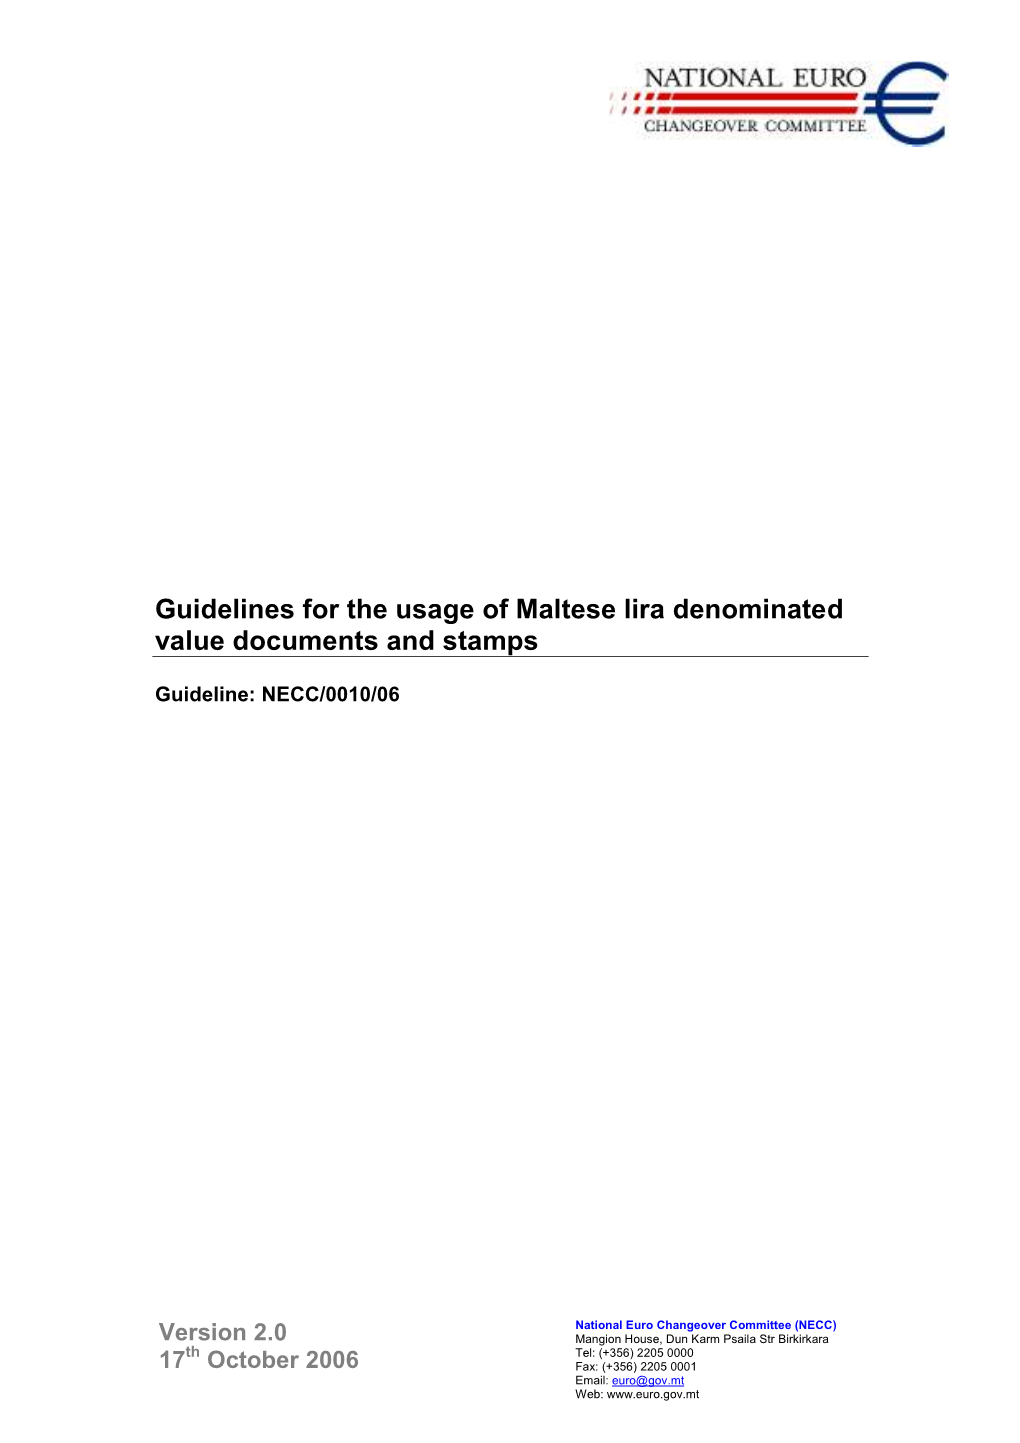 Guidelines for the Usage of Maltese Lira Denominated Value Documents and Stamps